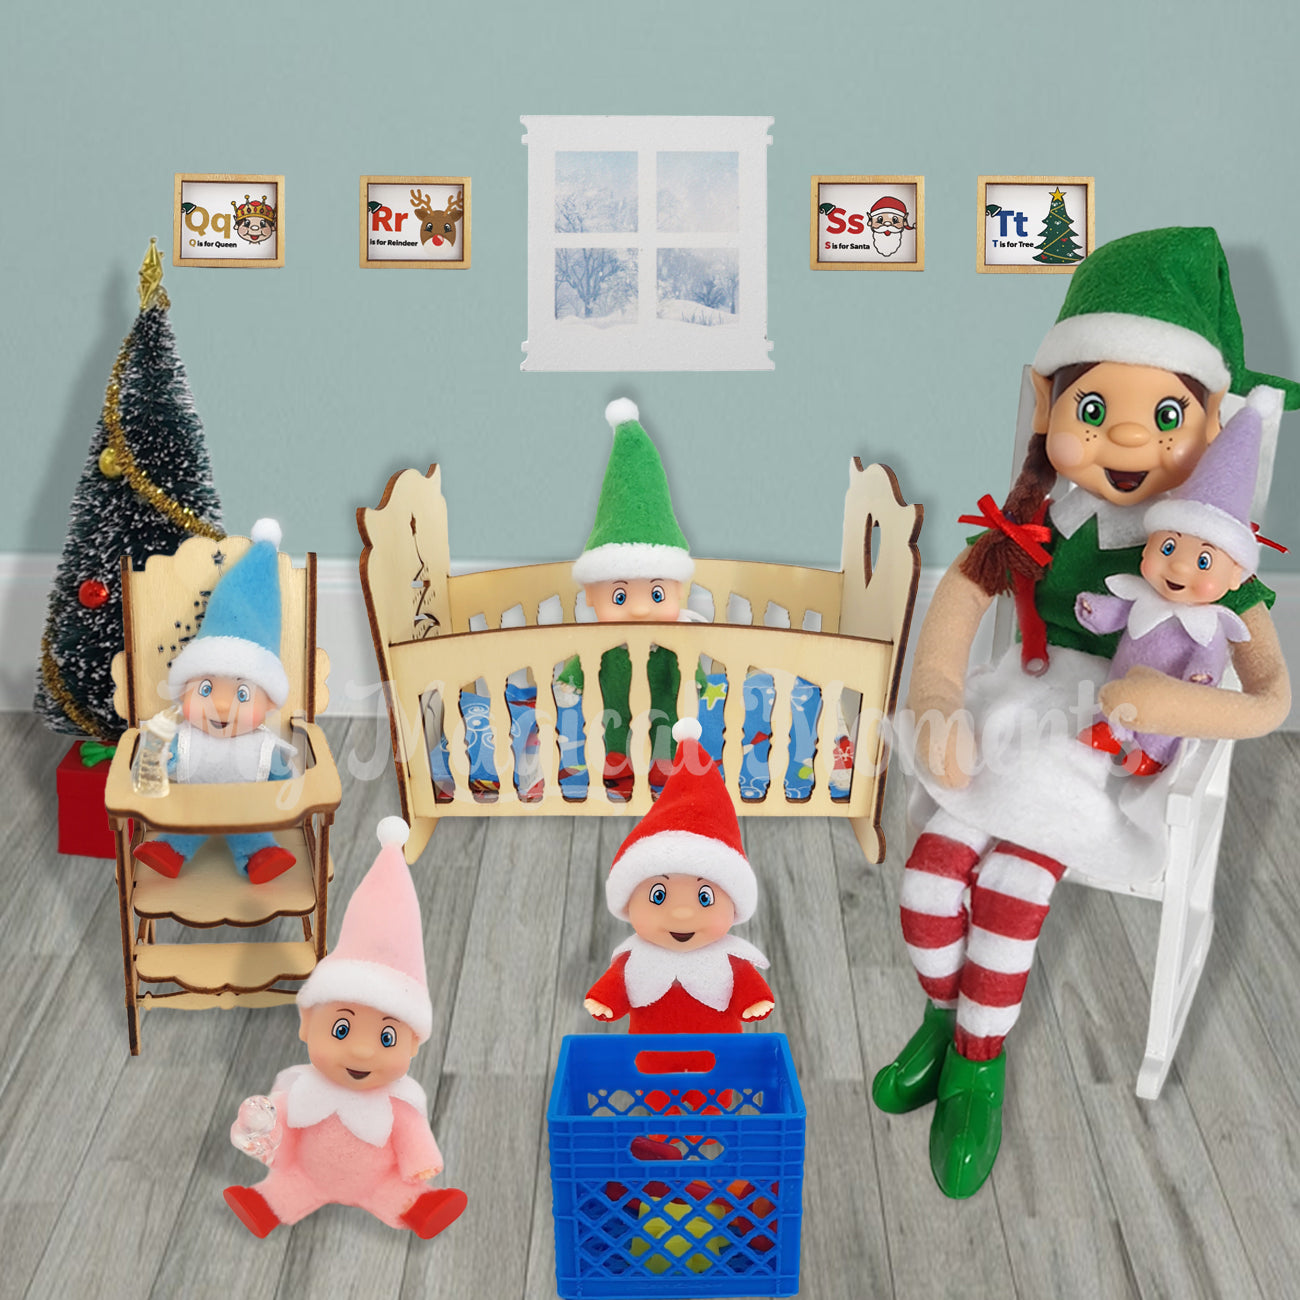 Elf baby daycare, with elf babies wearing different colour onsies. One is in the cot and the other elf baby is in a high chair